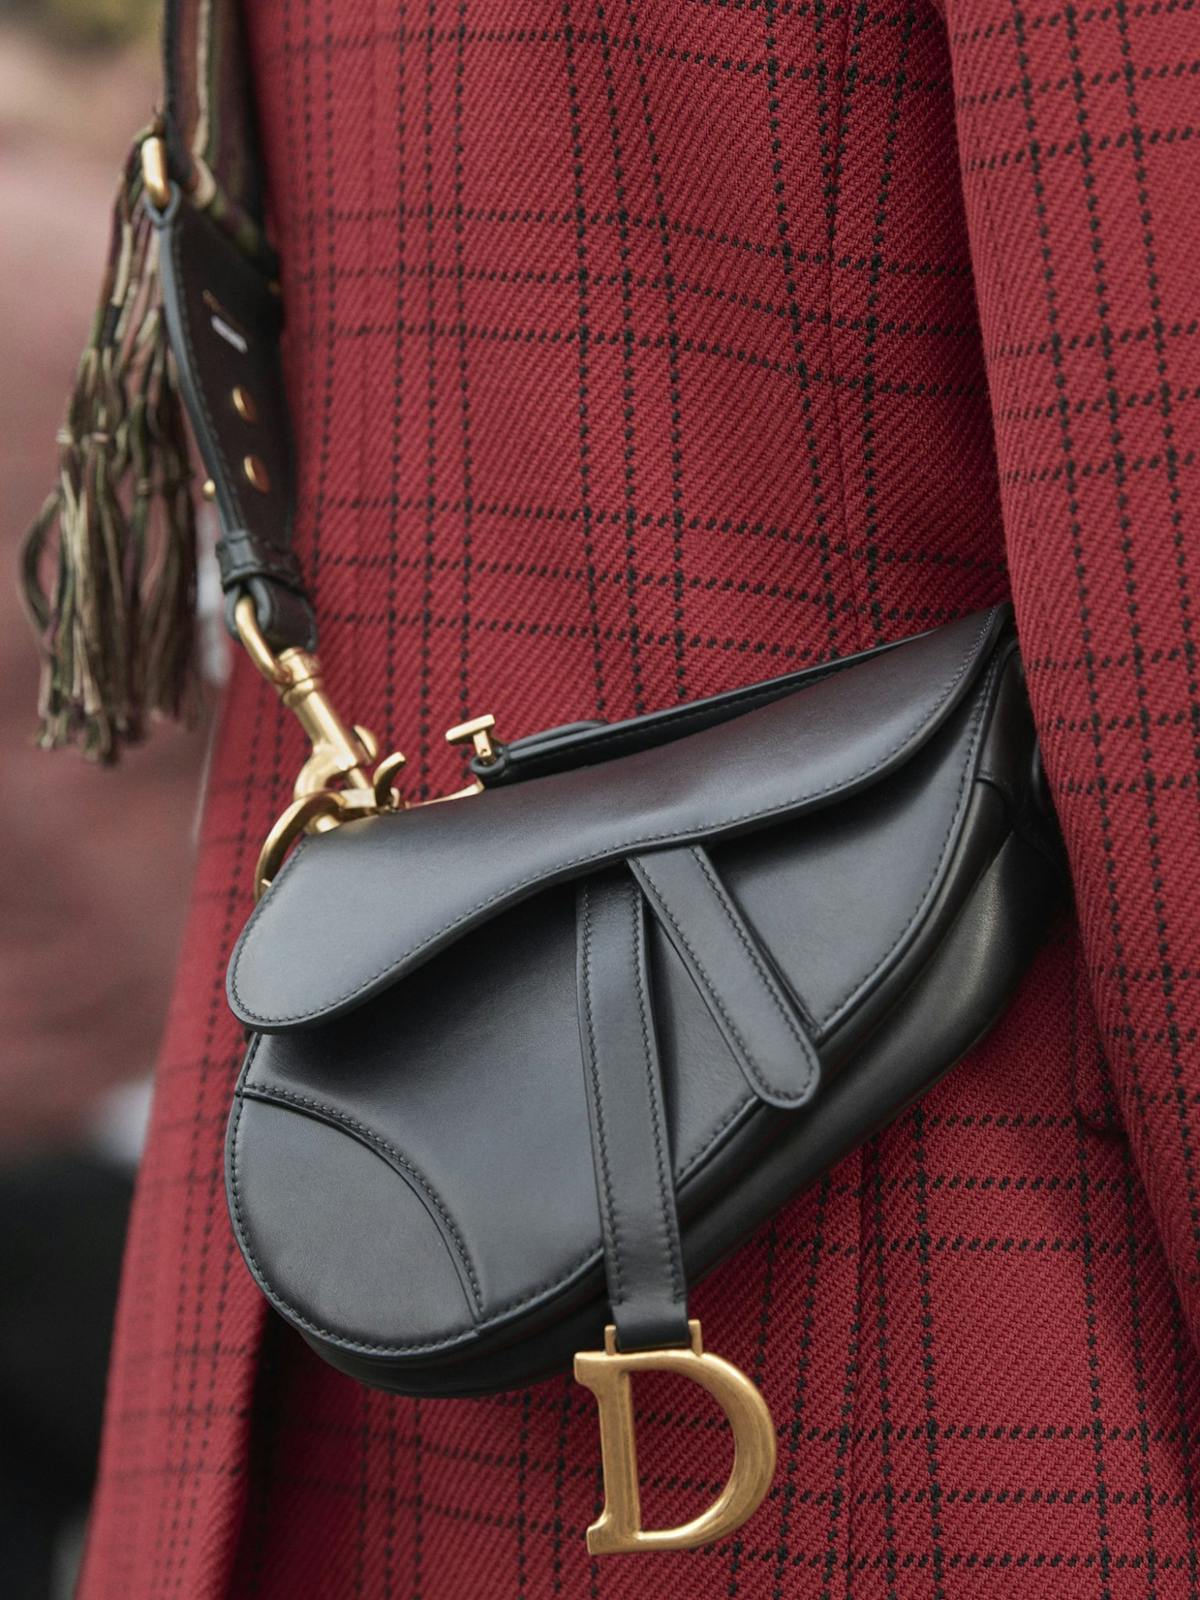 Dior has just dropped the biggest 'it' bag of the season, and you might